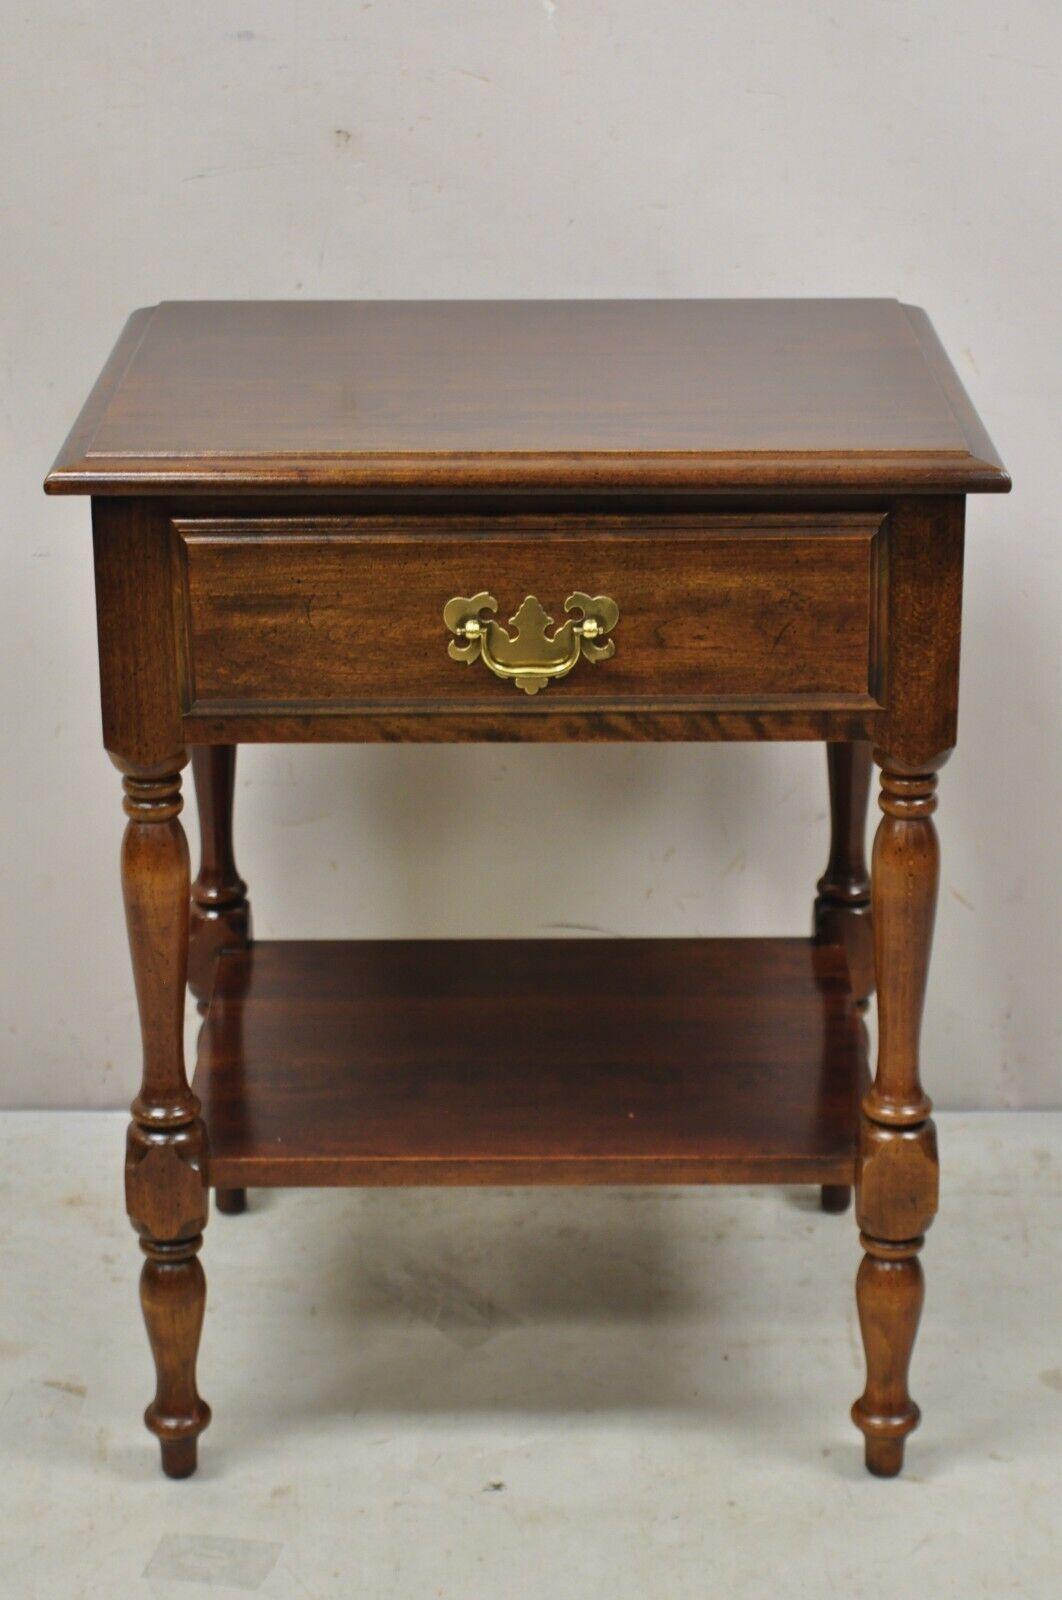 Vintage cherry wood colonial style one drawer nightstand bedside end table. Item features a lower shelf, solid wood construction, beautiful wood grain, 1 dovetailed drawer, quality American craftsmanship, great style ad form. Circa Late 20th